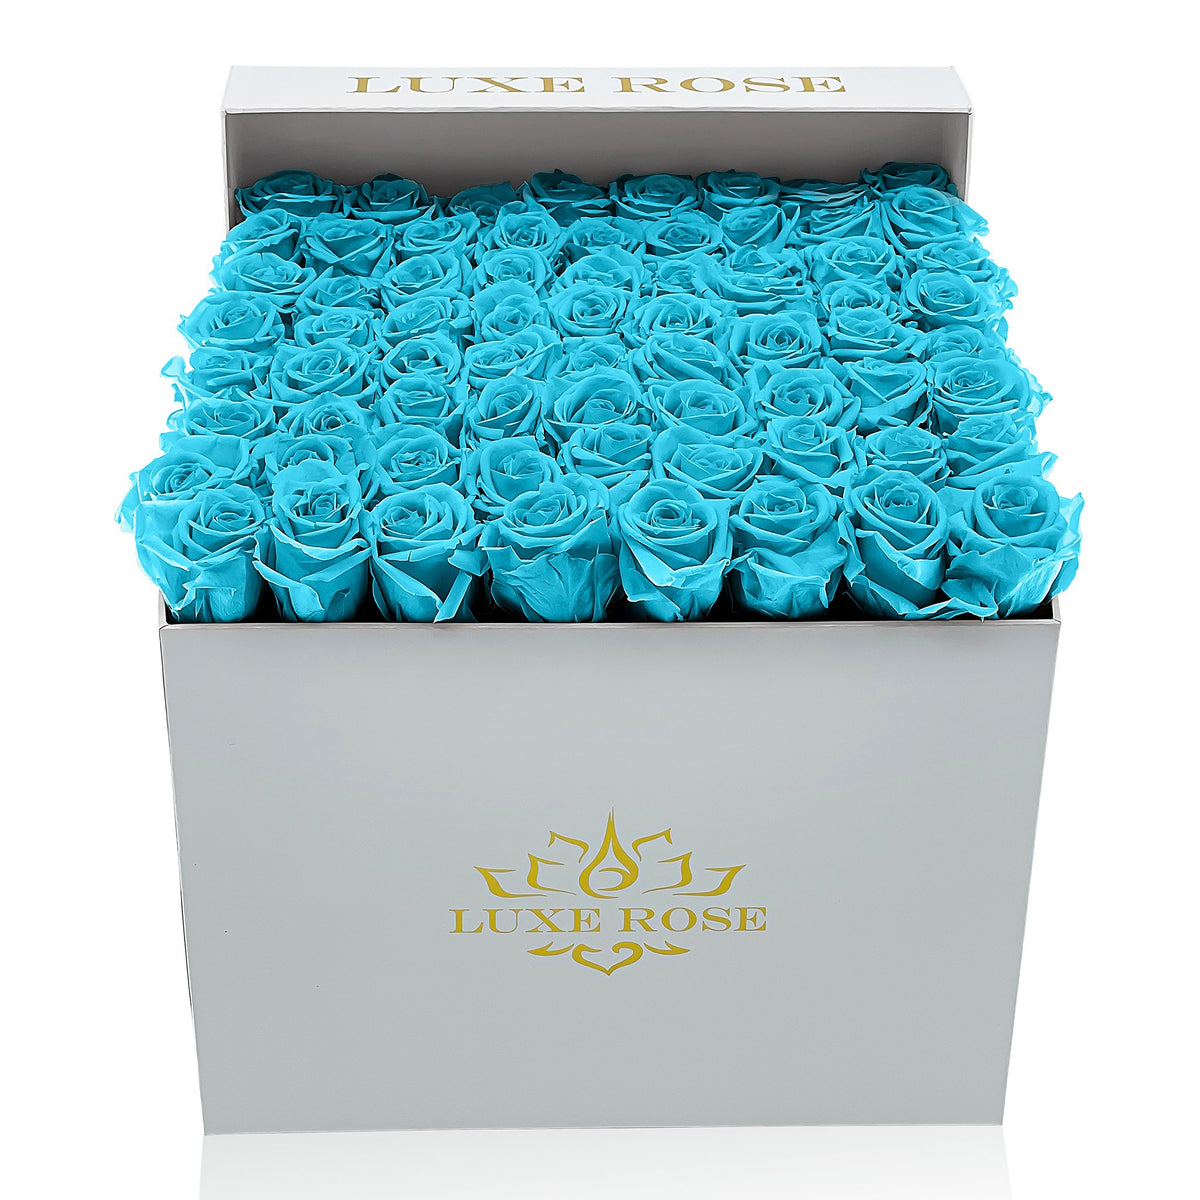 Preserved Roses Large Box | Bright Turquoise - White - Roses